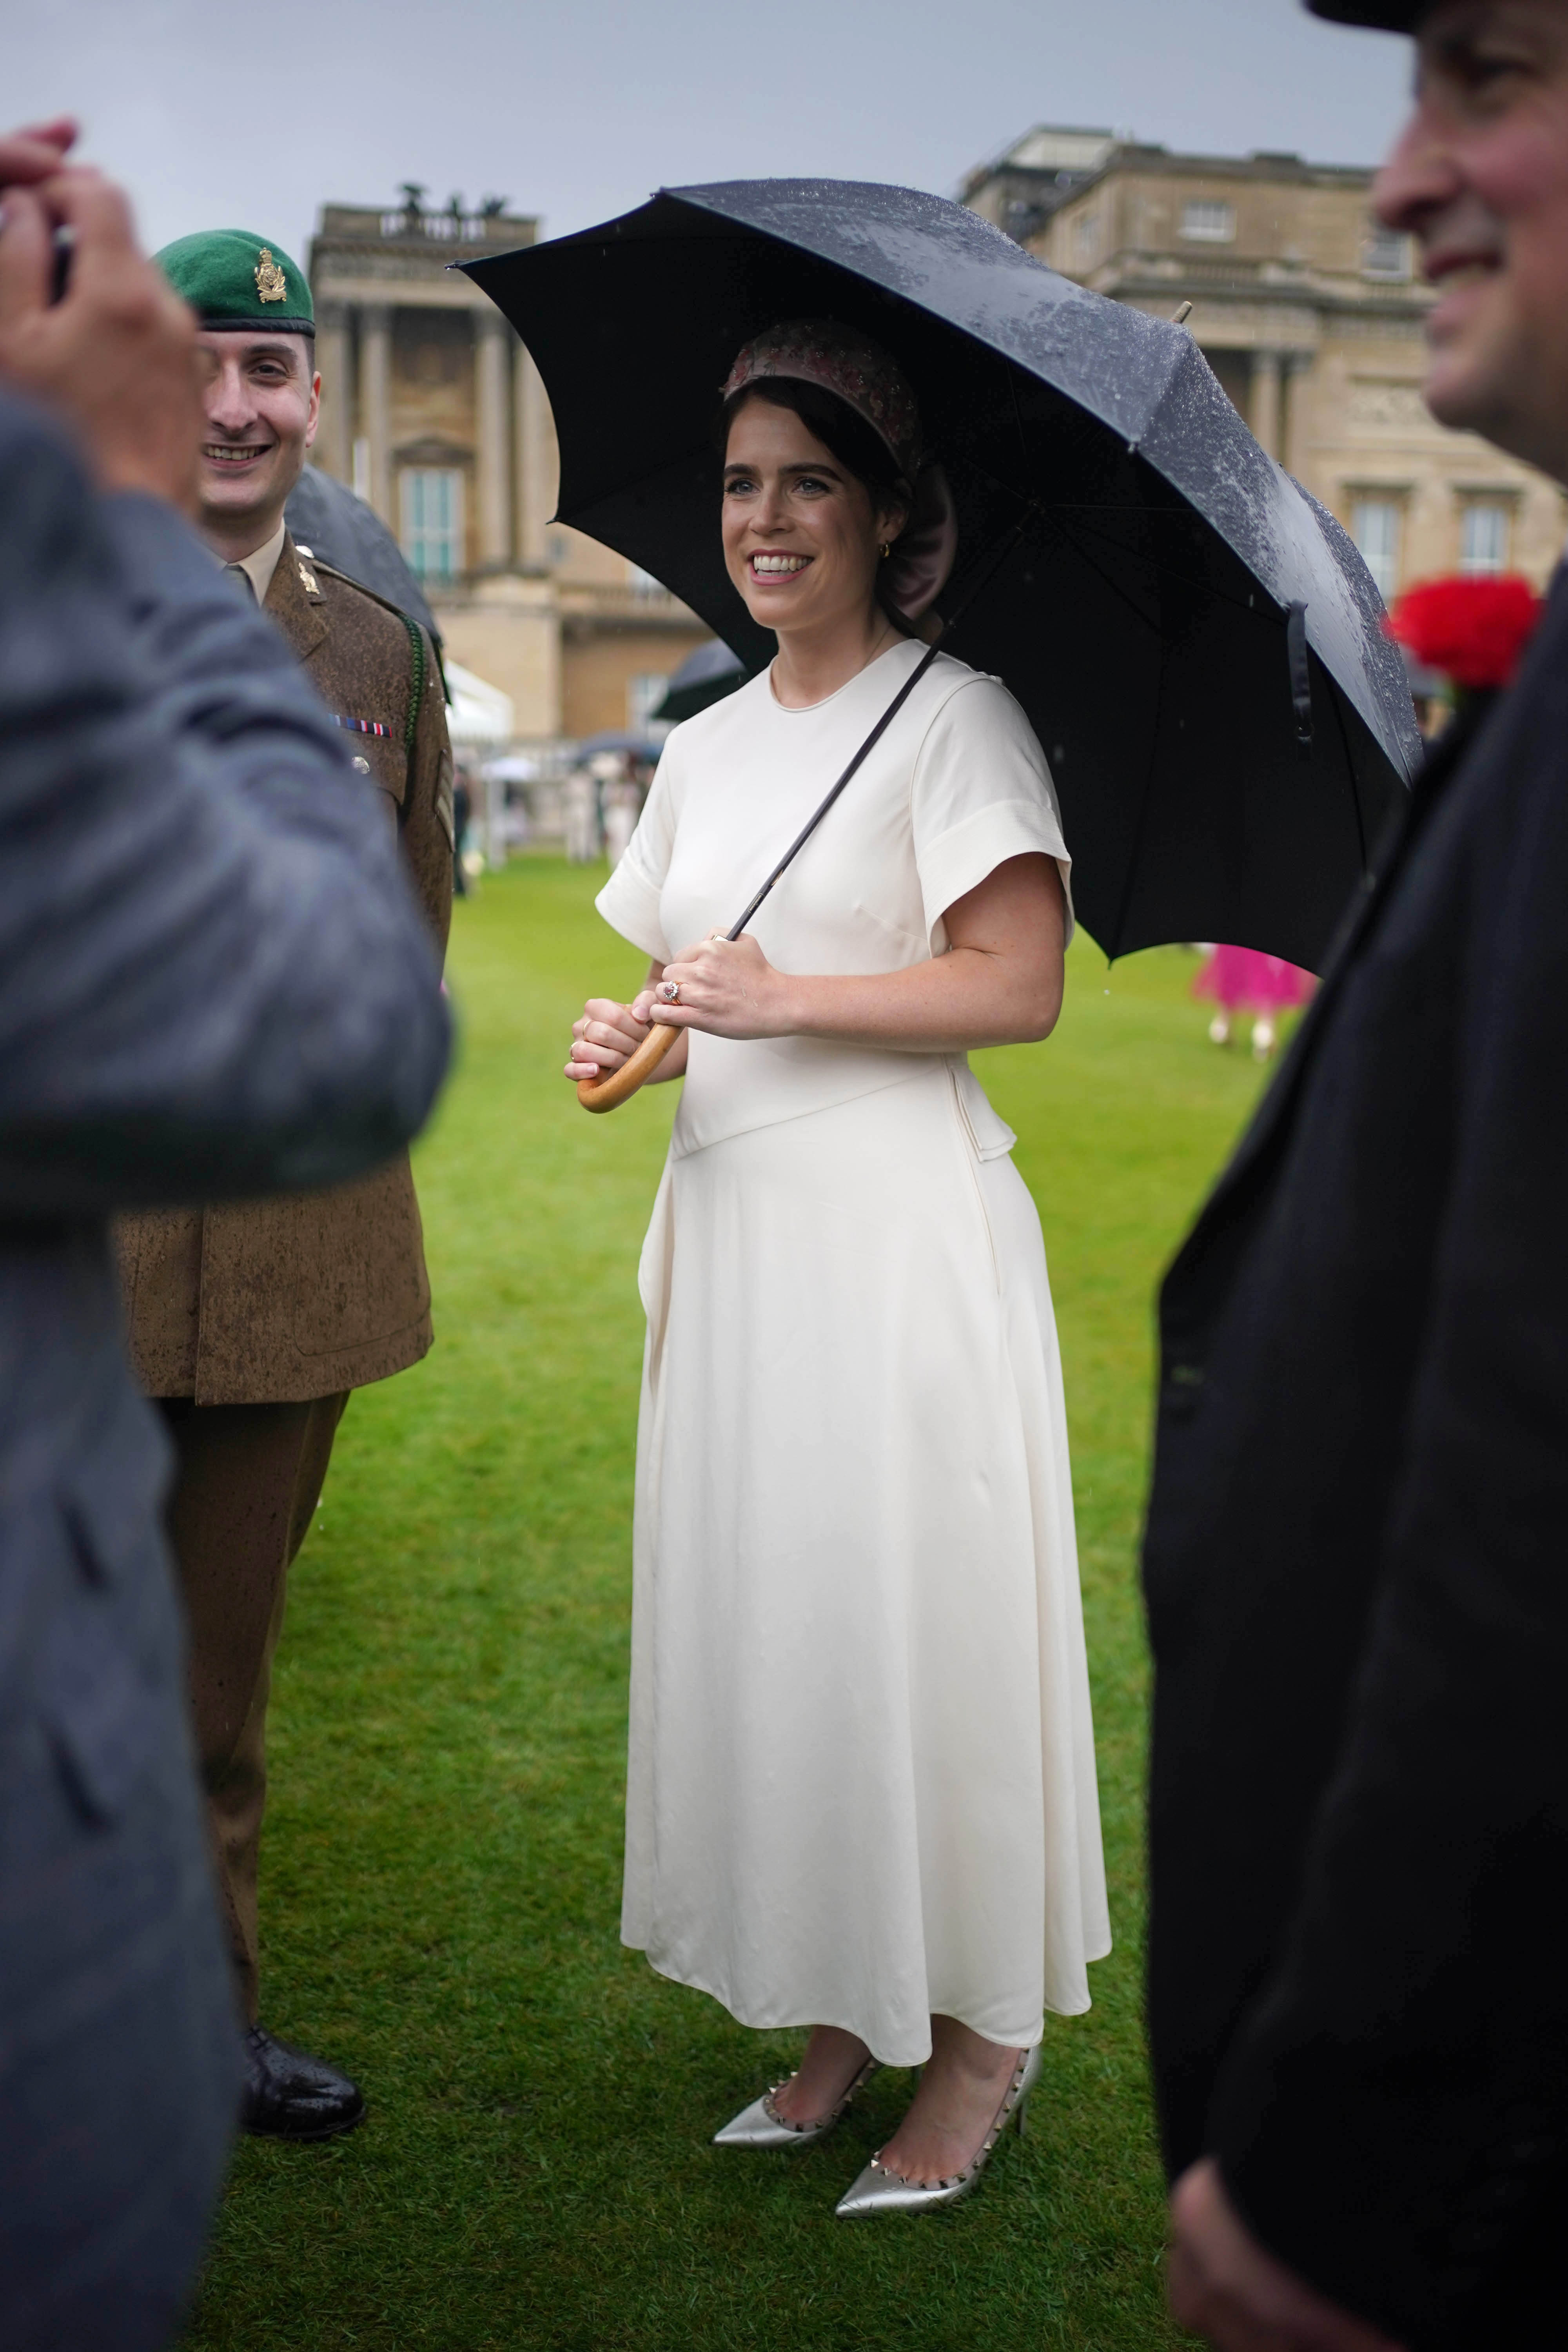 Princess Eugenie said she was 'delighted' to support her family at a garden party this week